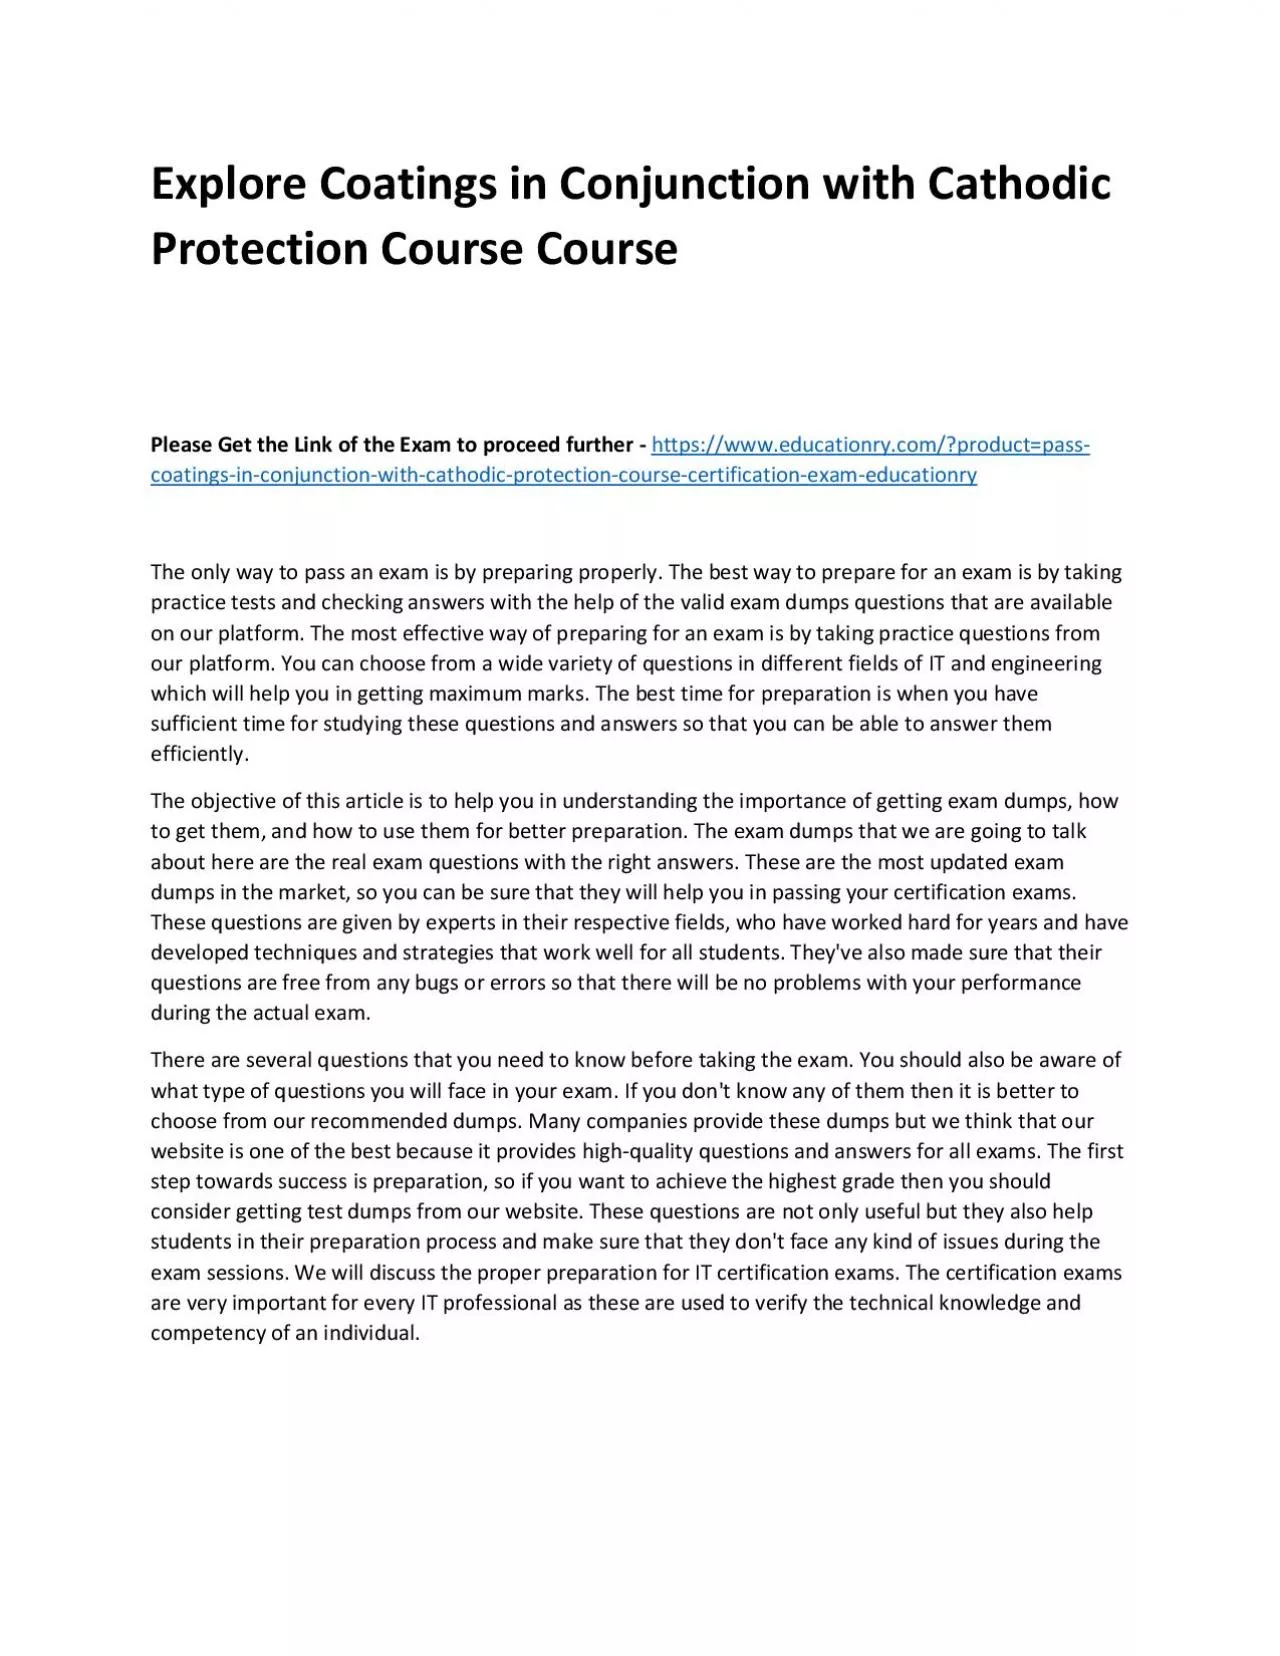 Explore Coatings in Conjunction with Cathodic Protection Practice Course